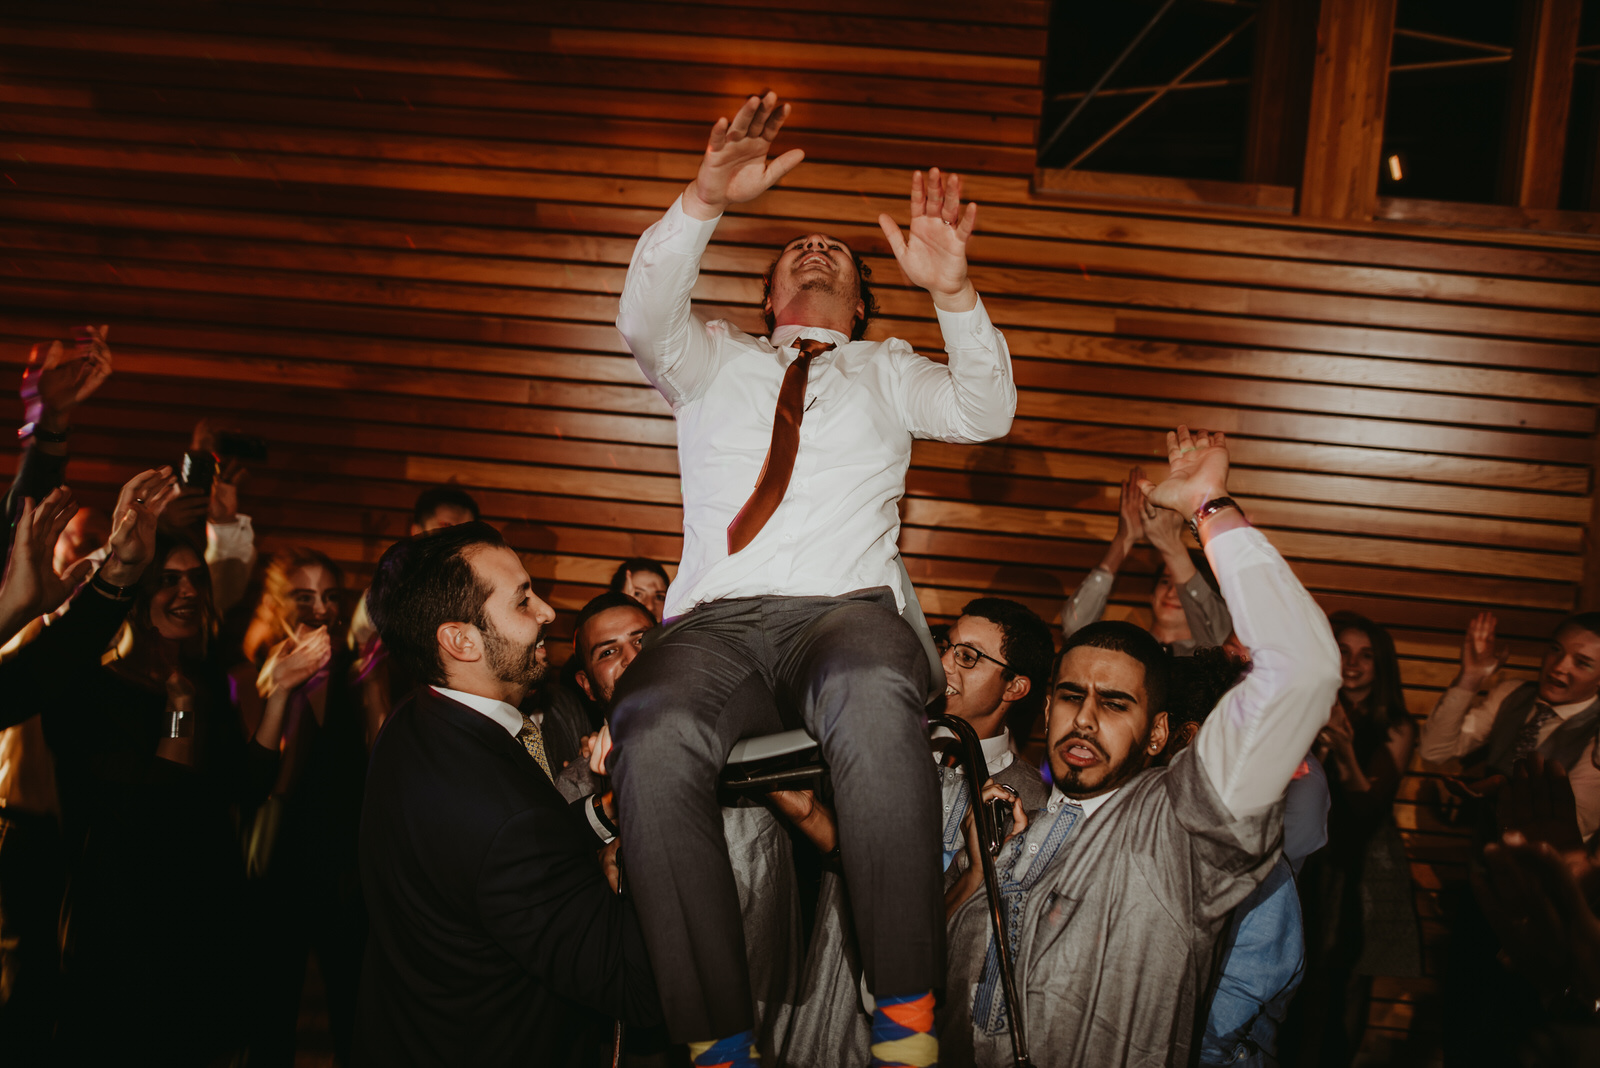 Crazy egyptian dance party, Bissell tree house Michigan, moody photography, Chicago wedding photography - The Adamkovi